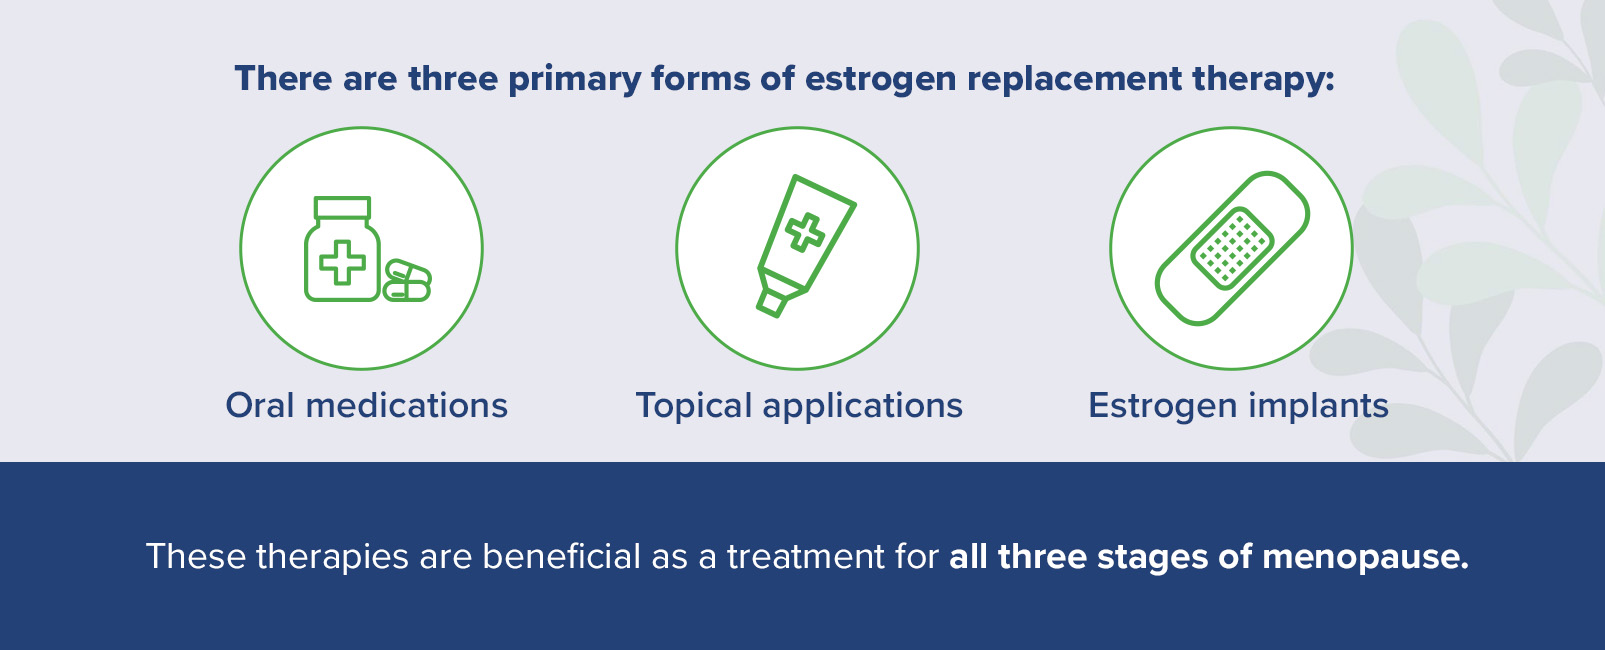 lists the three primary forms of estrogen